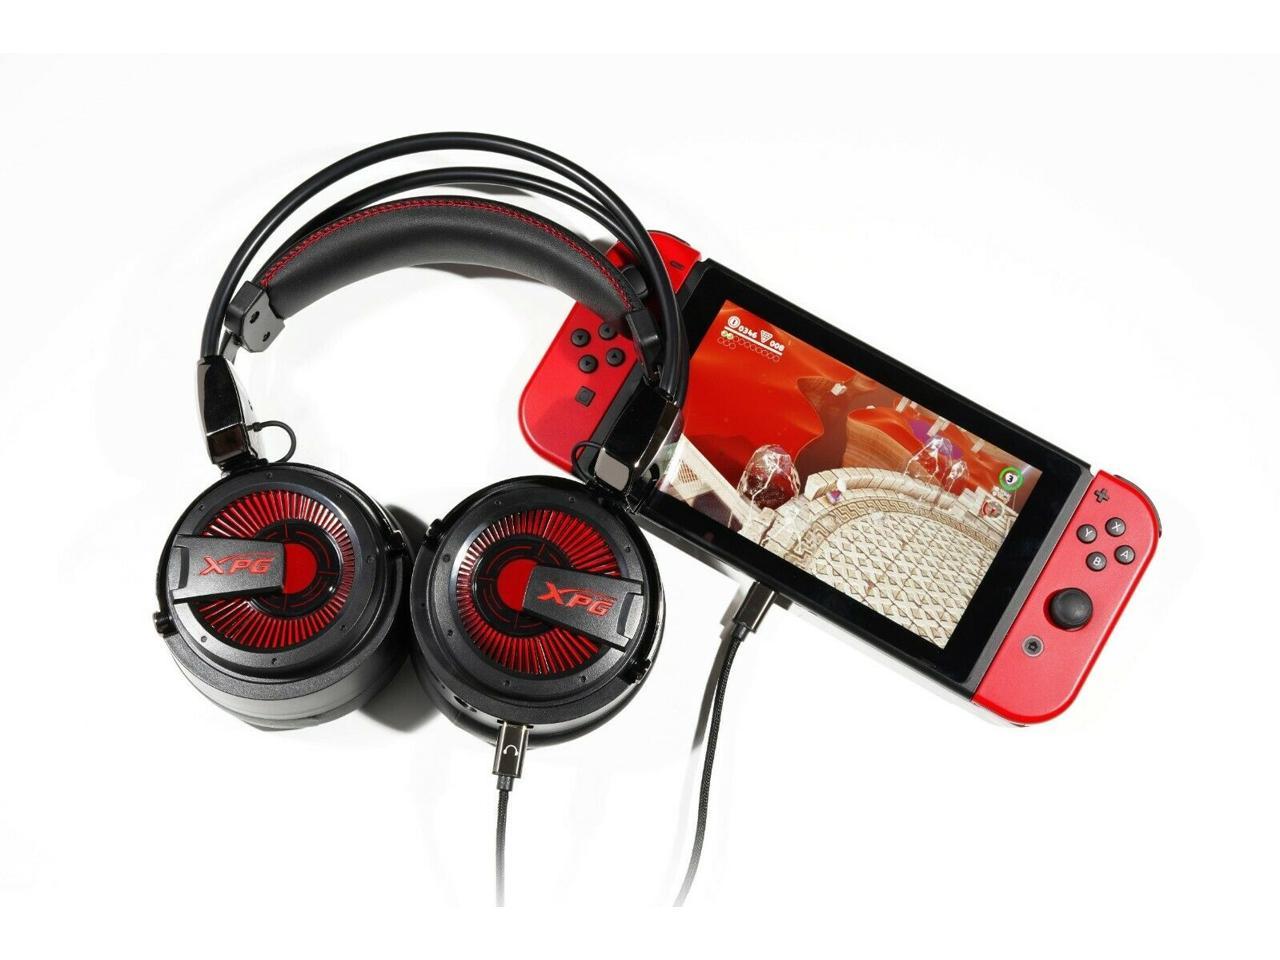 XPG PRECOG Gaming Headset: PC and Console Gaming Dual-Driver Pro-Gaming Headset